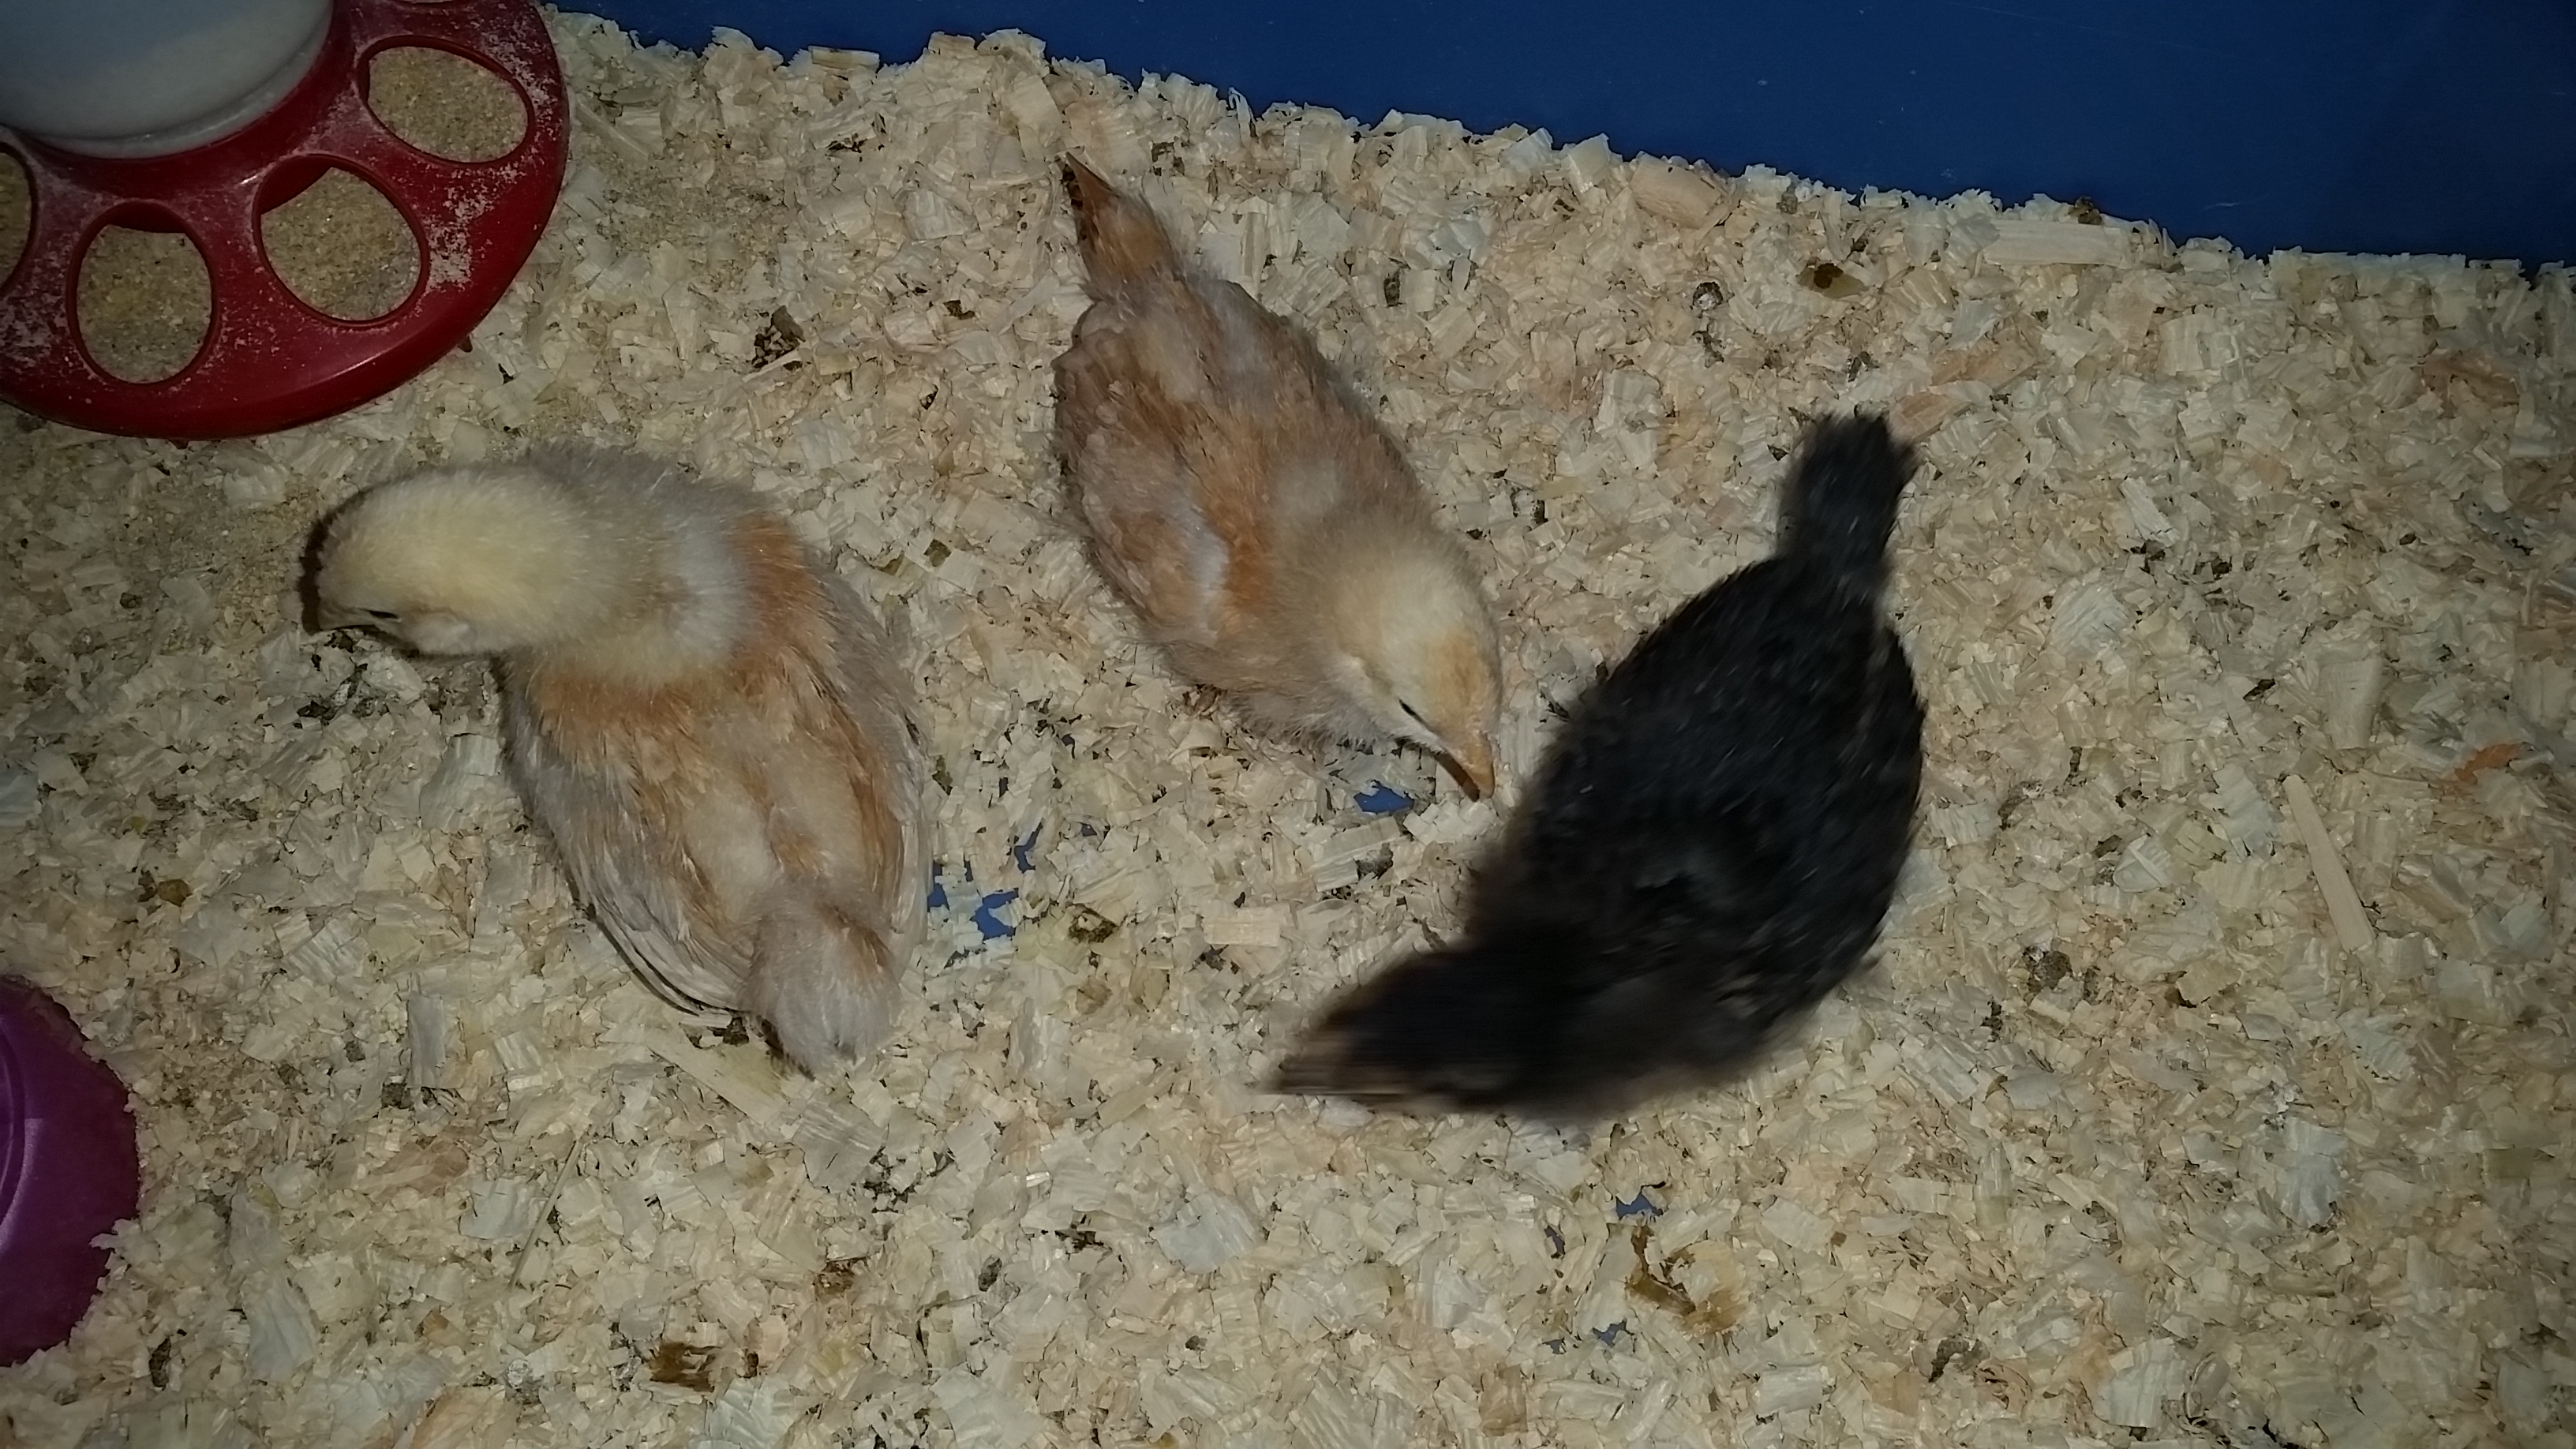 My new editions. 2 buff orpingtons and a golden laced wyandotte